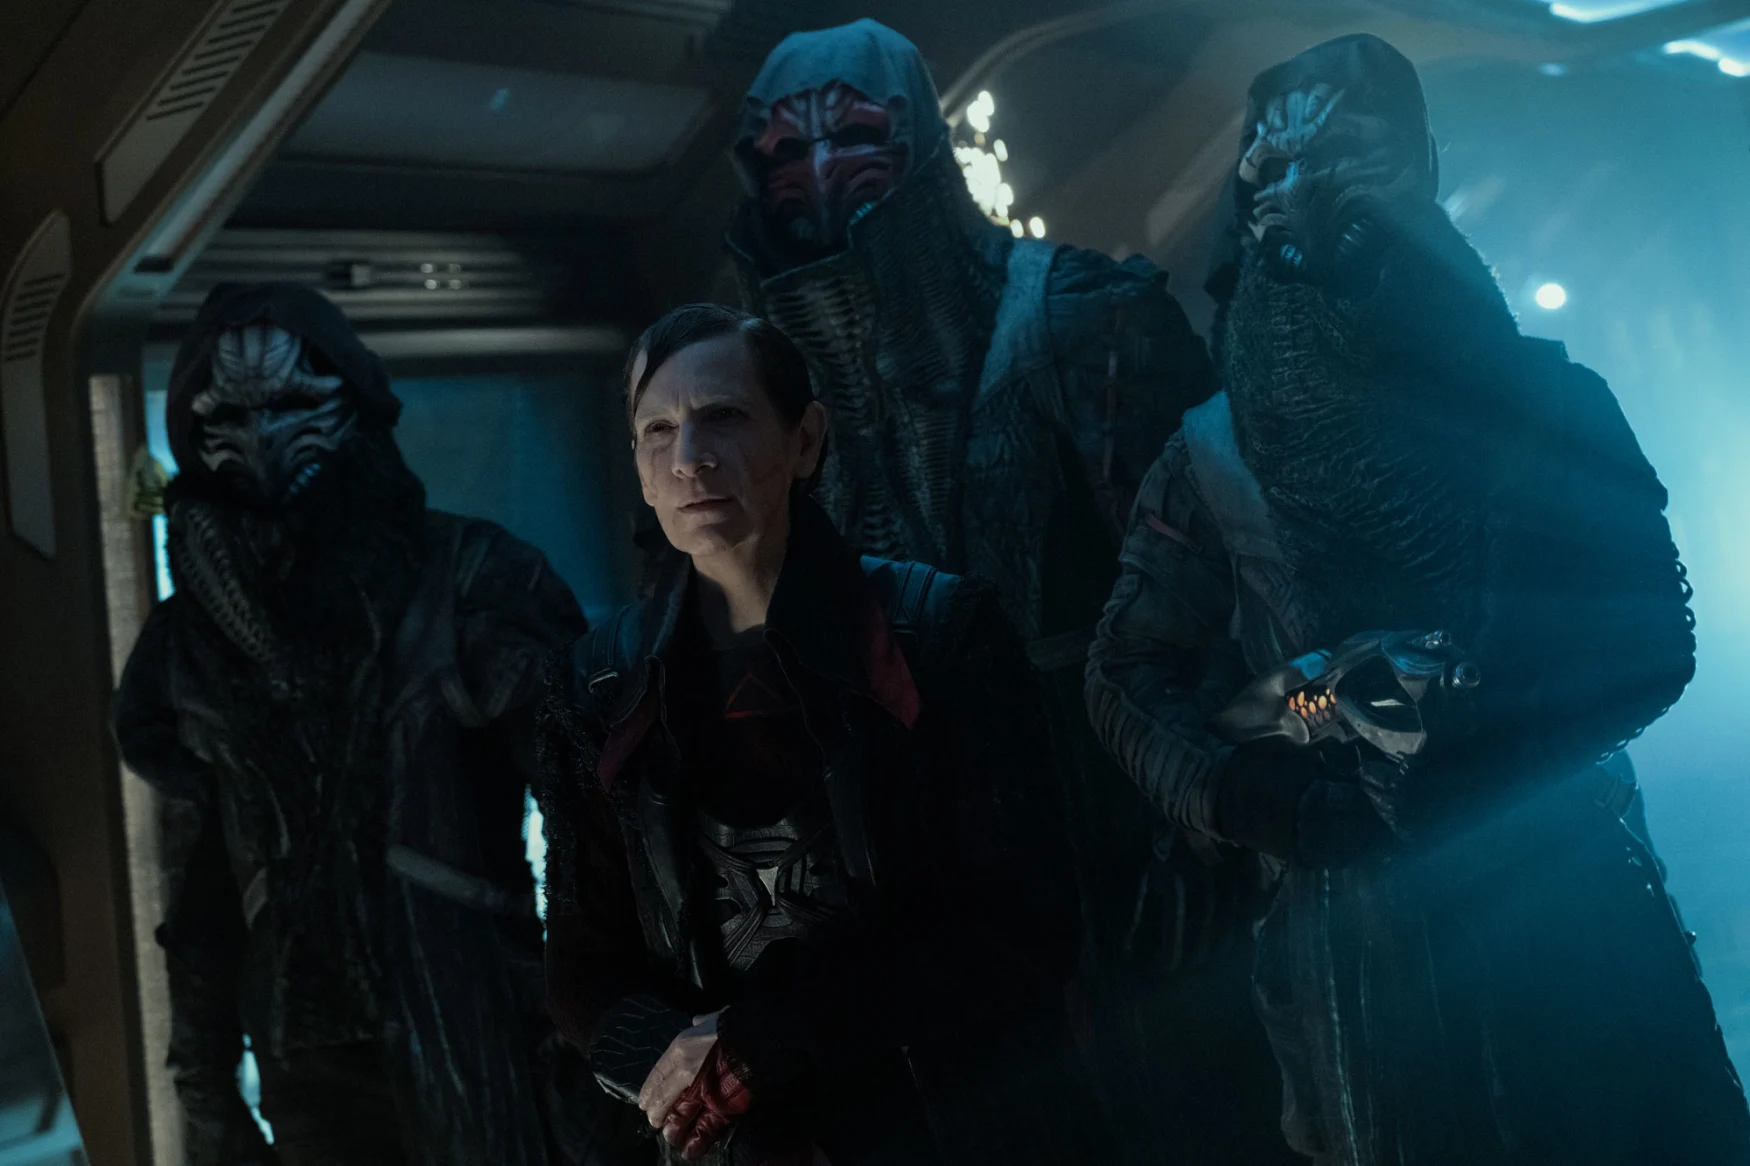 Image of Amanda Plummer and some aliens in a dark corridor in an unnamed location during 'Star Trek: Picard's third season